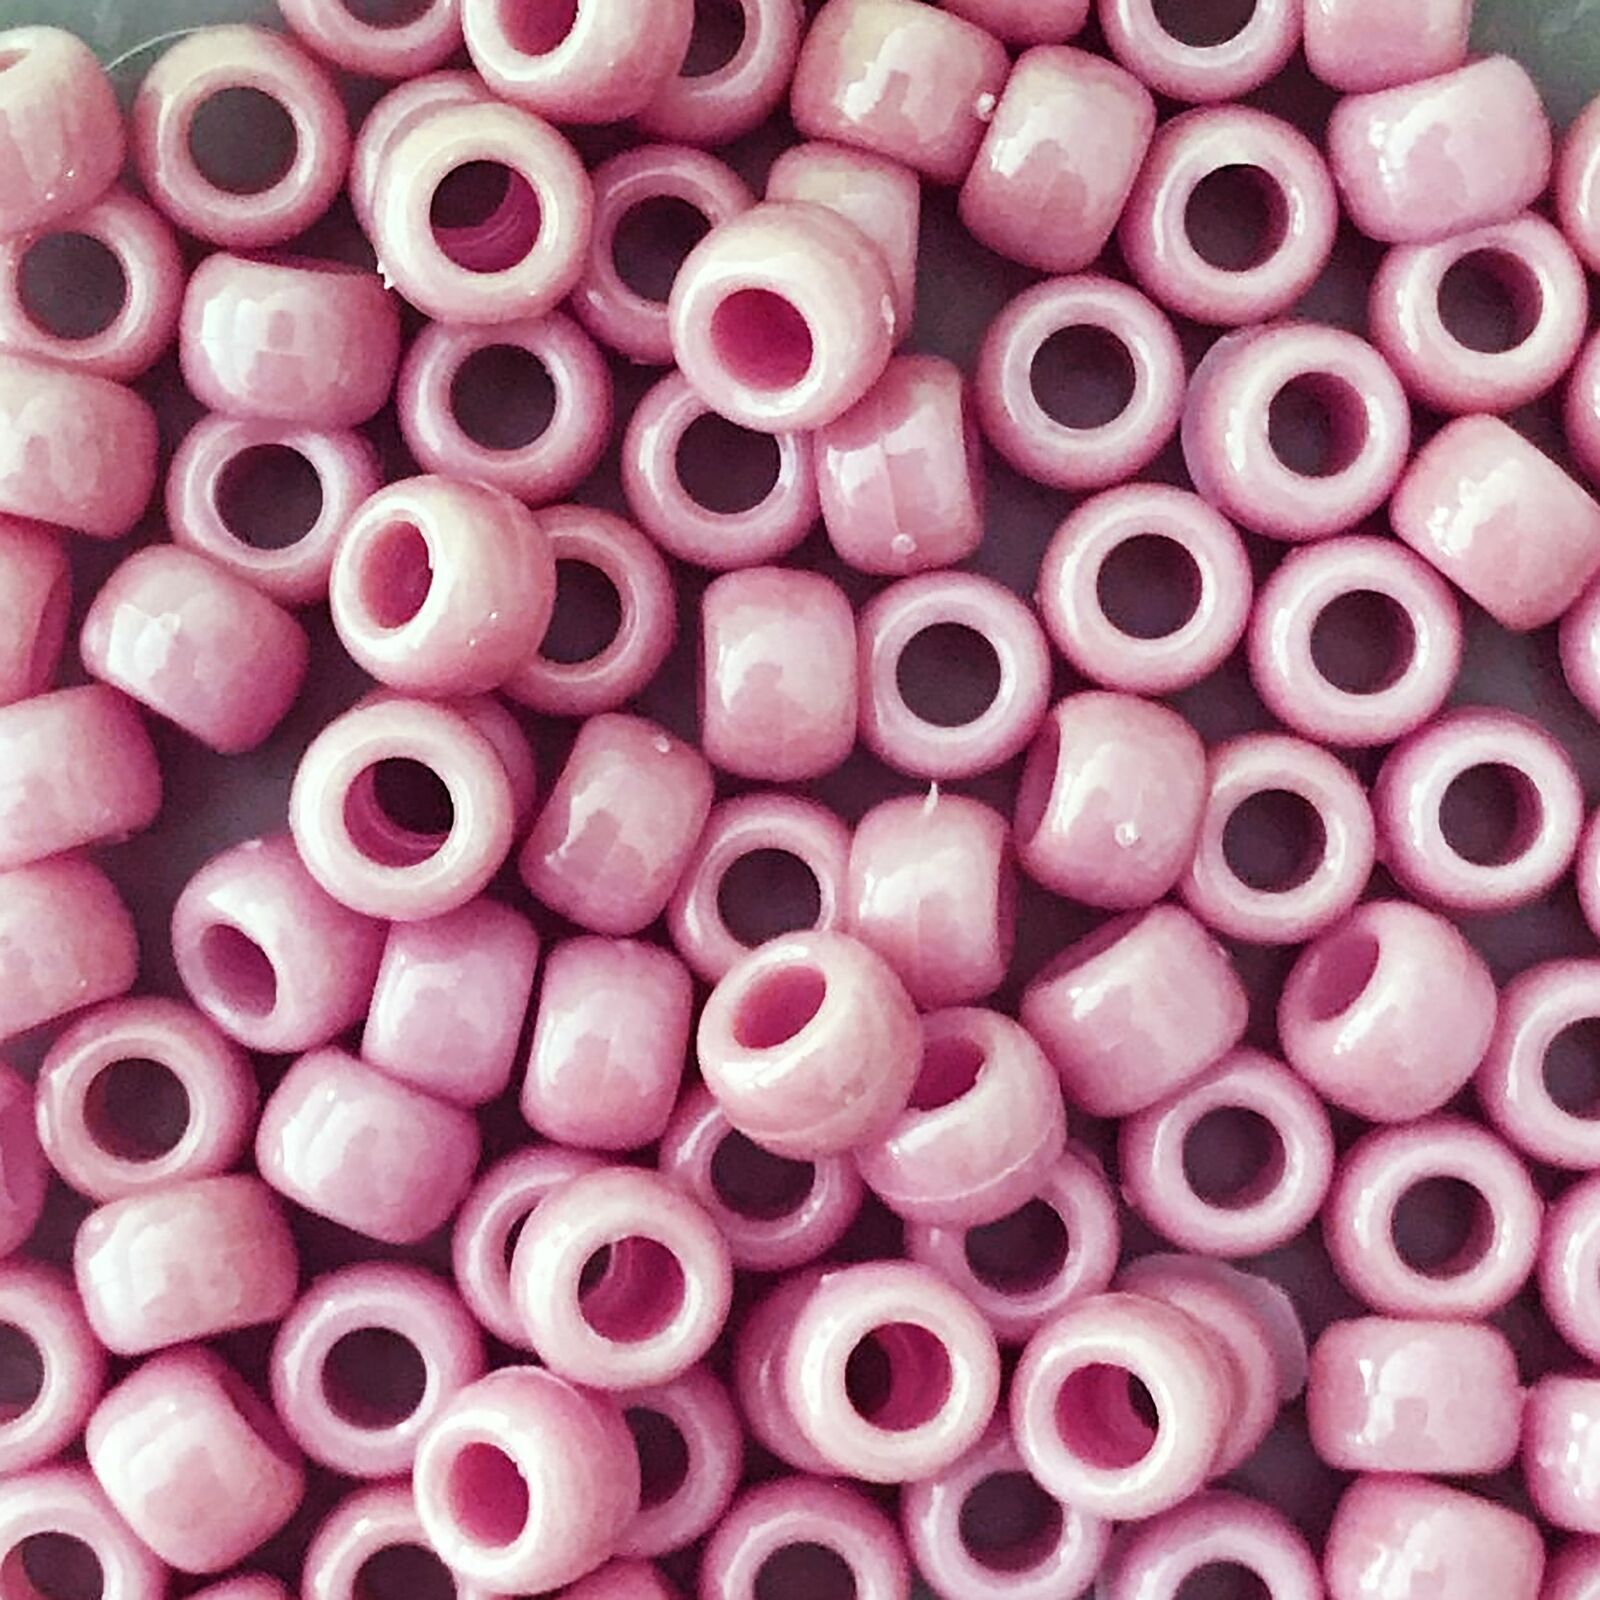 Pony Beads Dark Berry Pink Opaque Large Hole Beads Made in USA